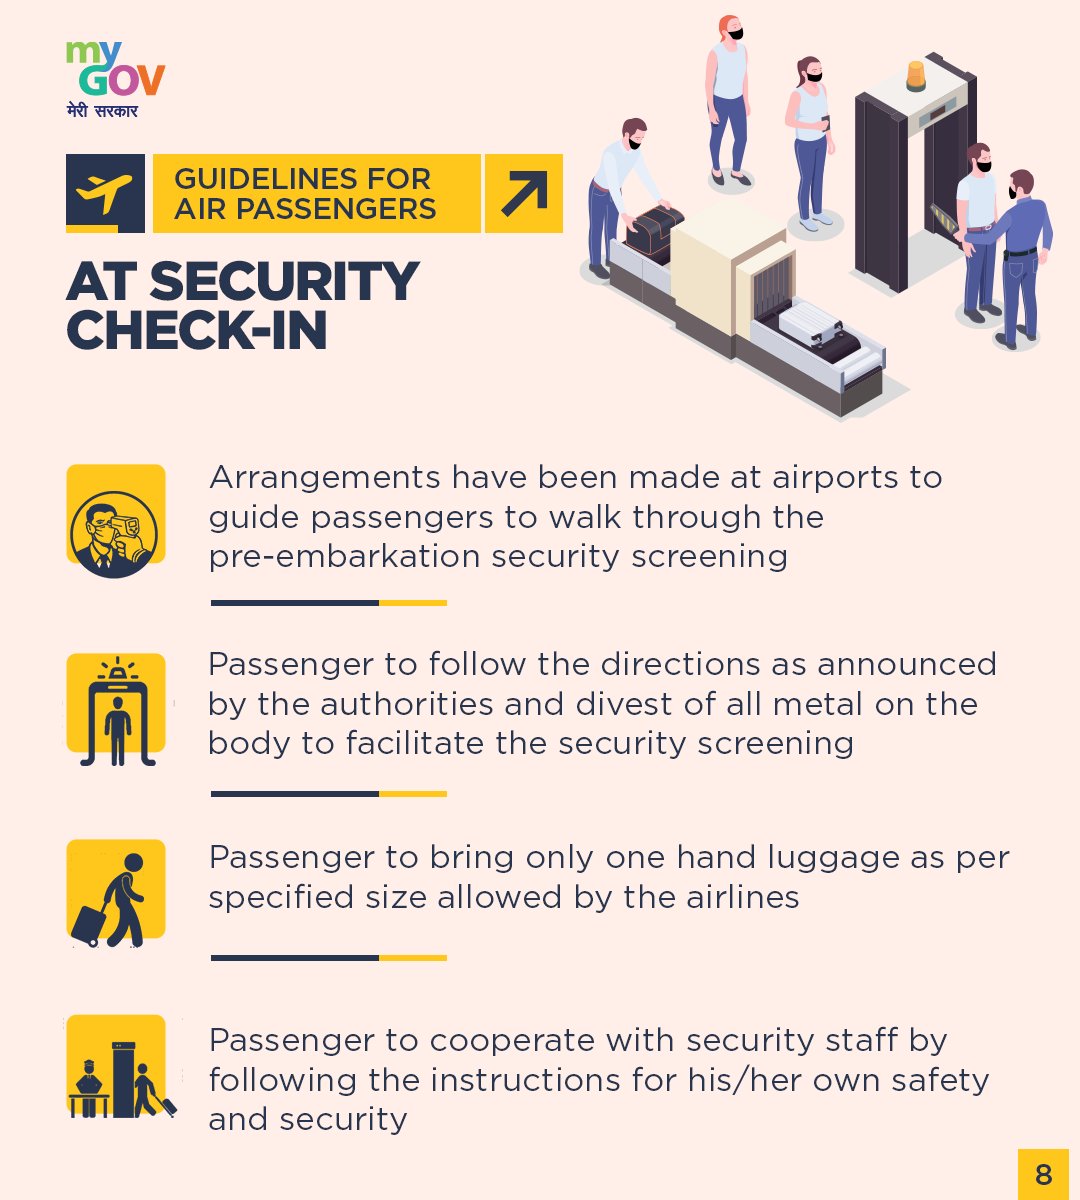 Passengers travelling by Air should follow these directions at Security Check-in.  #IndiaFightsCorona